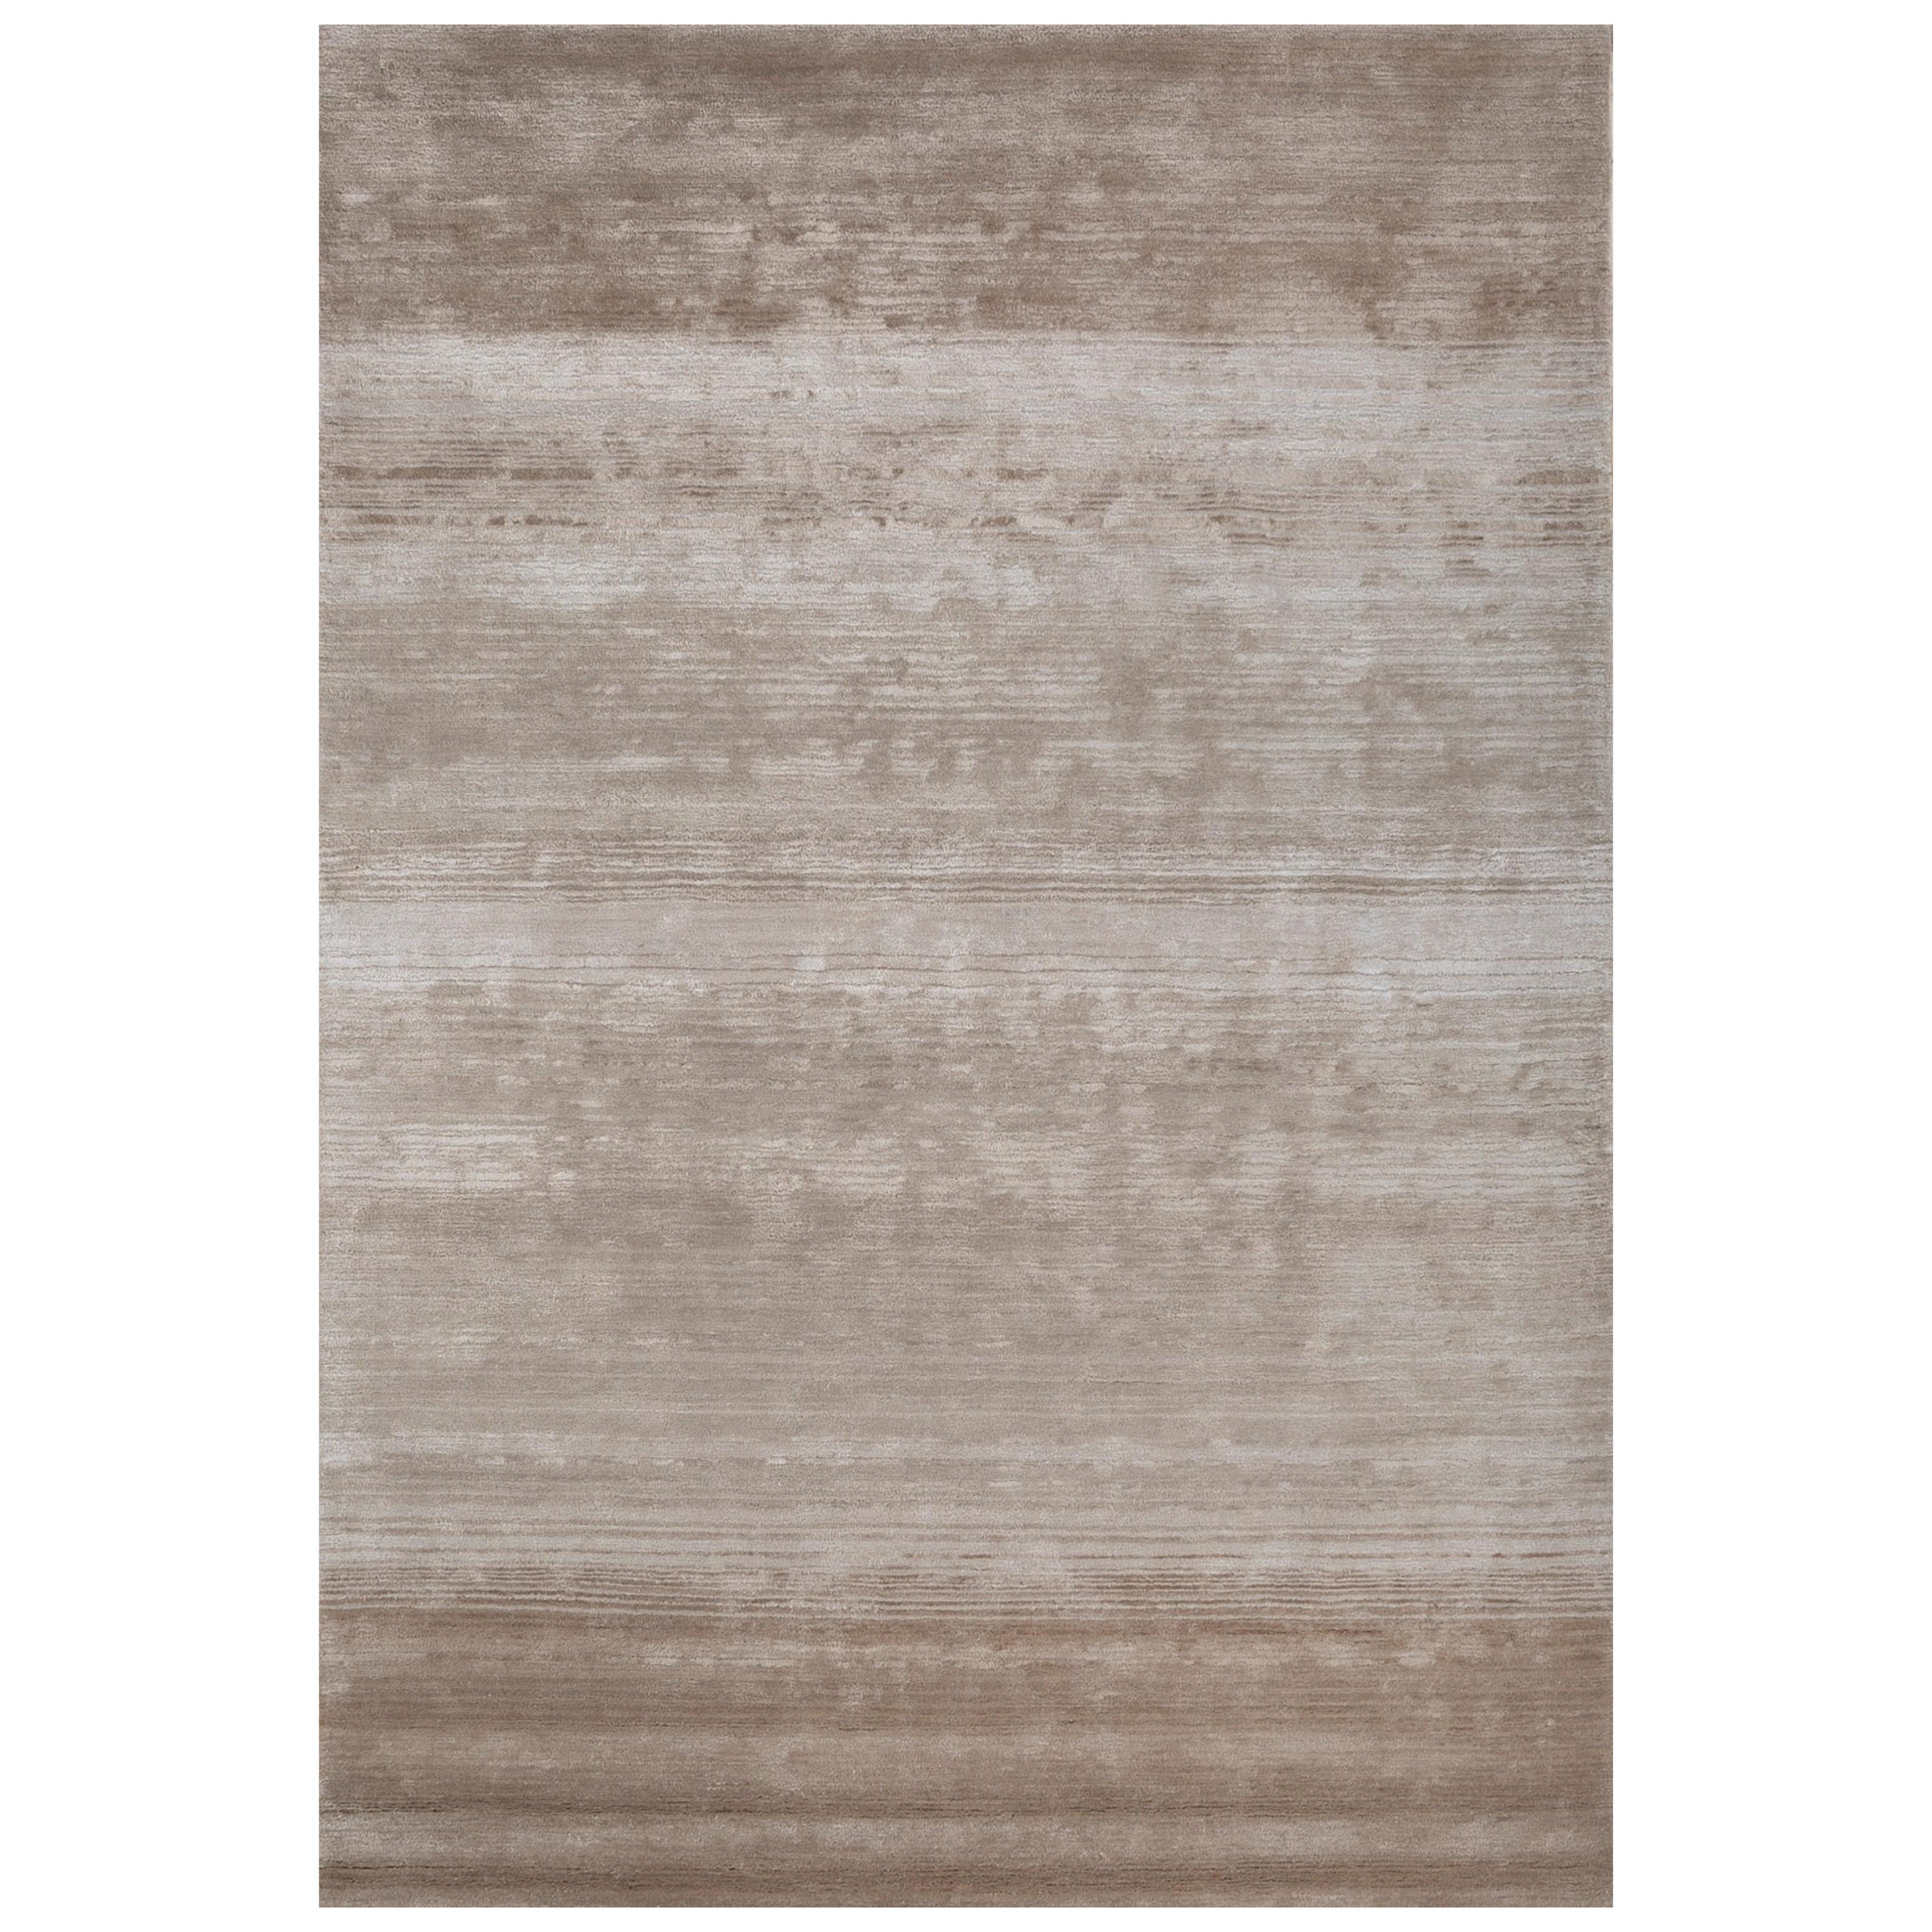 Opal Overlays White Antique White 180x270 cm Hand Tufted Rug For Sale